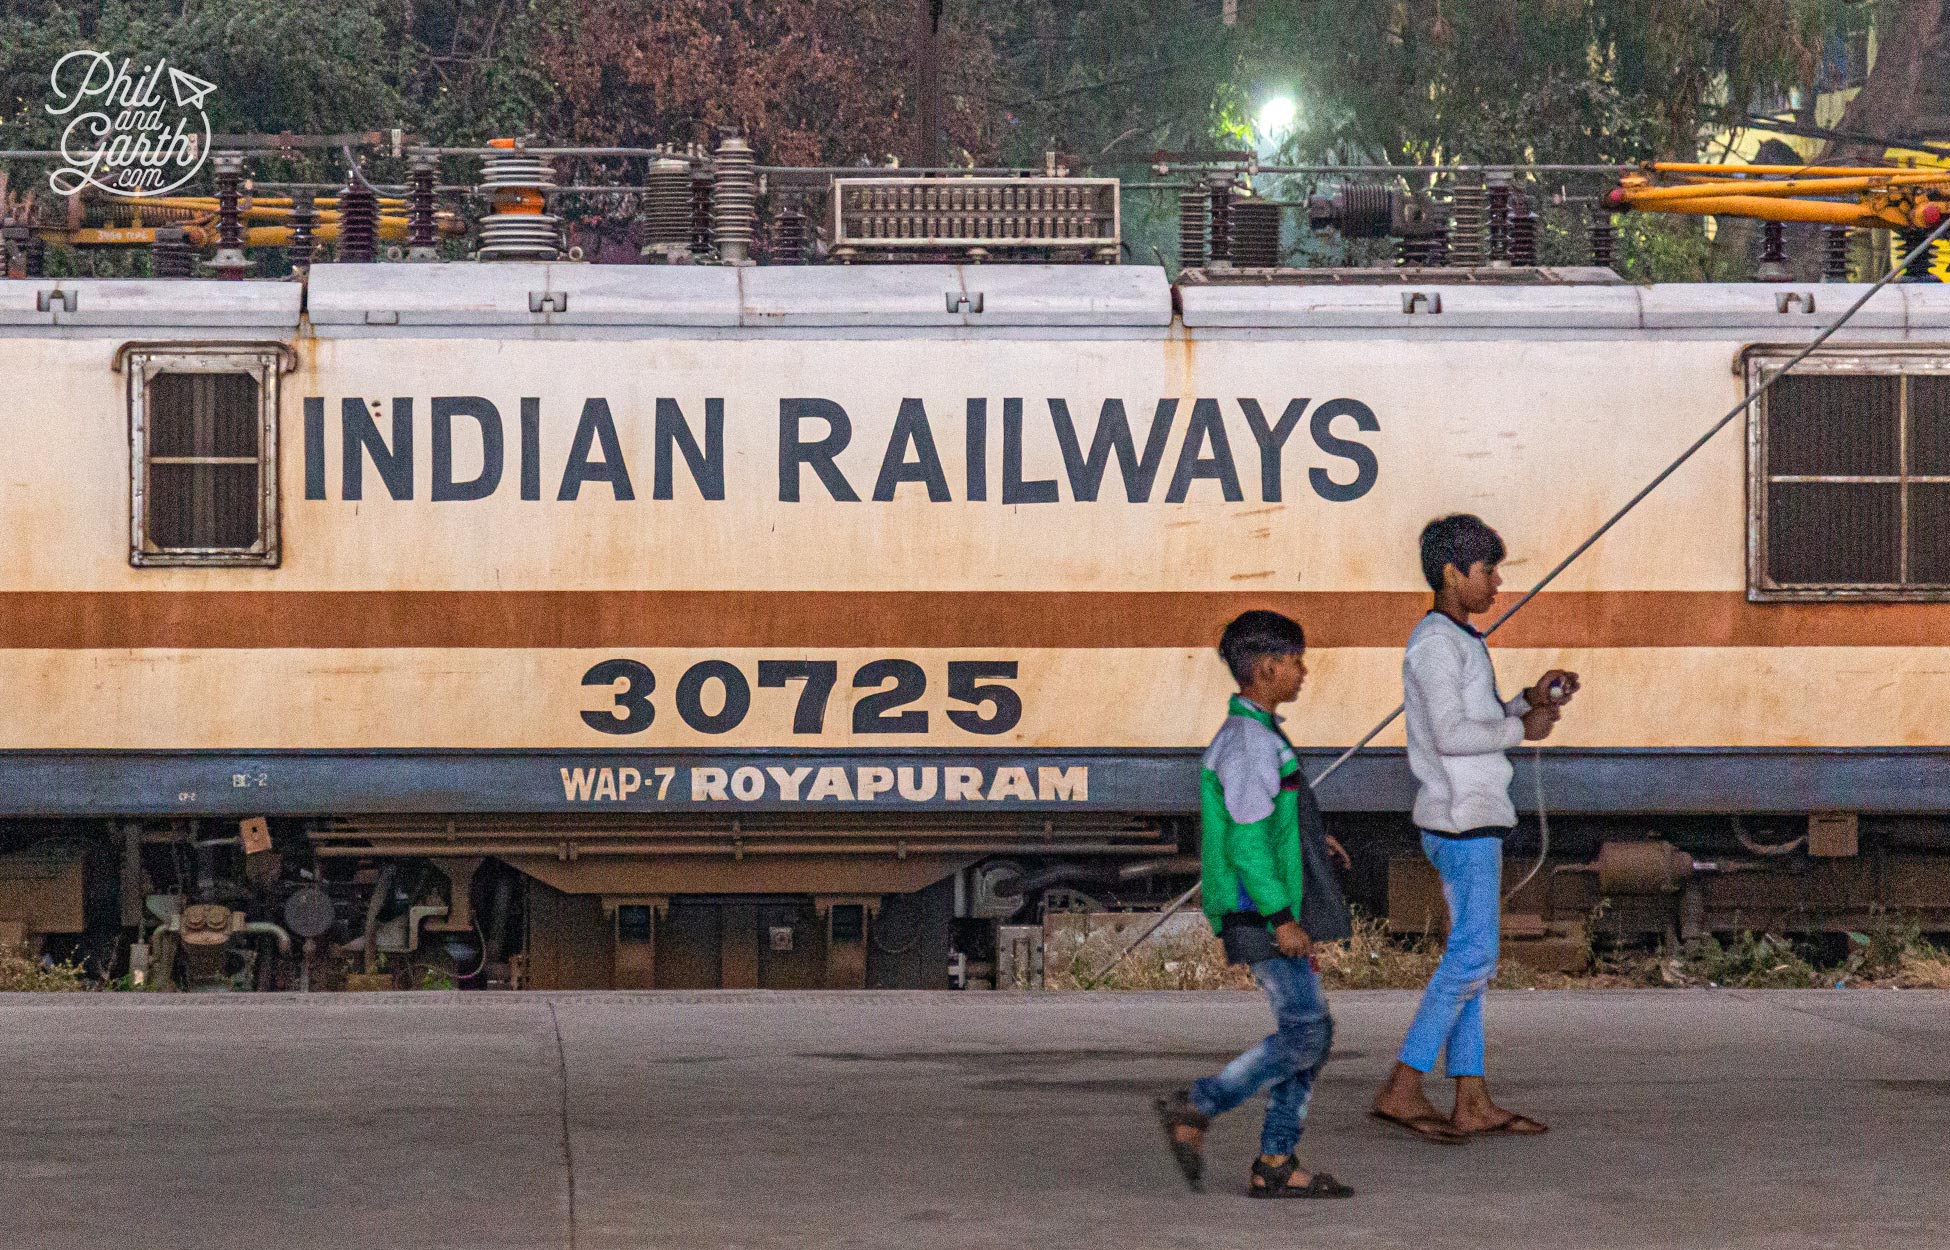 The Indian Railways network is the life-blood of the country connecting remote towns with big cities